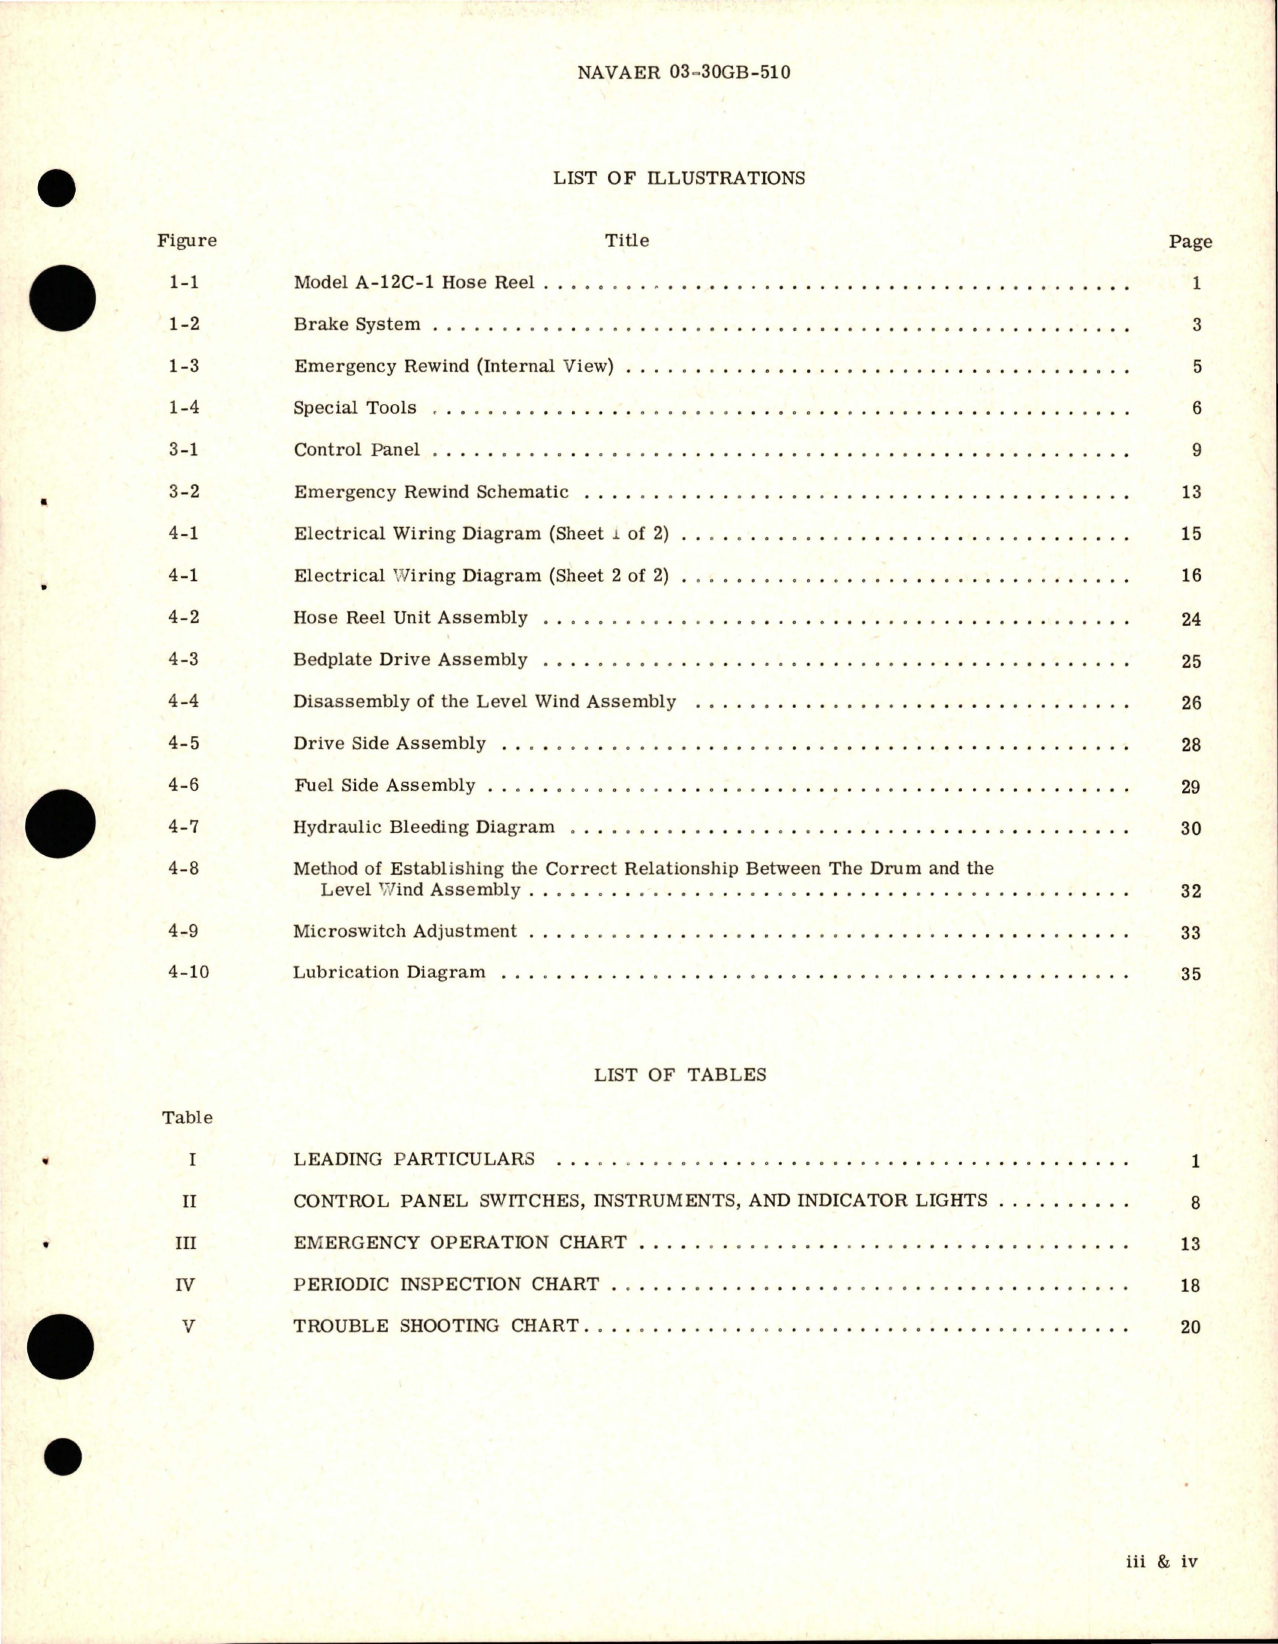 Sample page 5 from AirCorps Library document: Operation and Maintenance Instructions for Automatic Hose Reel Assembly - Models A-12C, A-12A-2, and A-12C-1